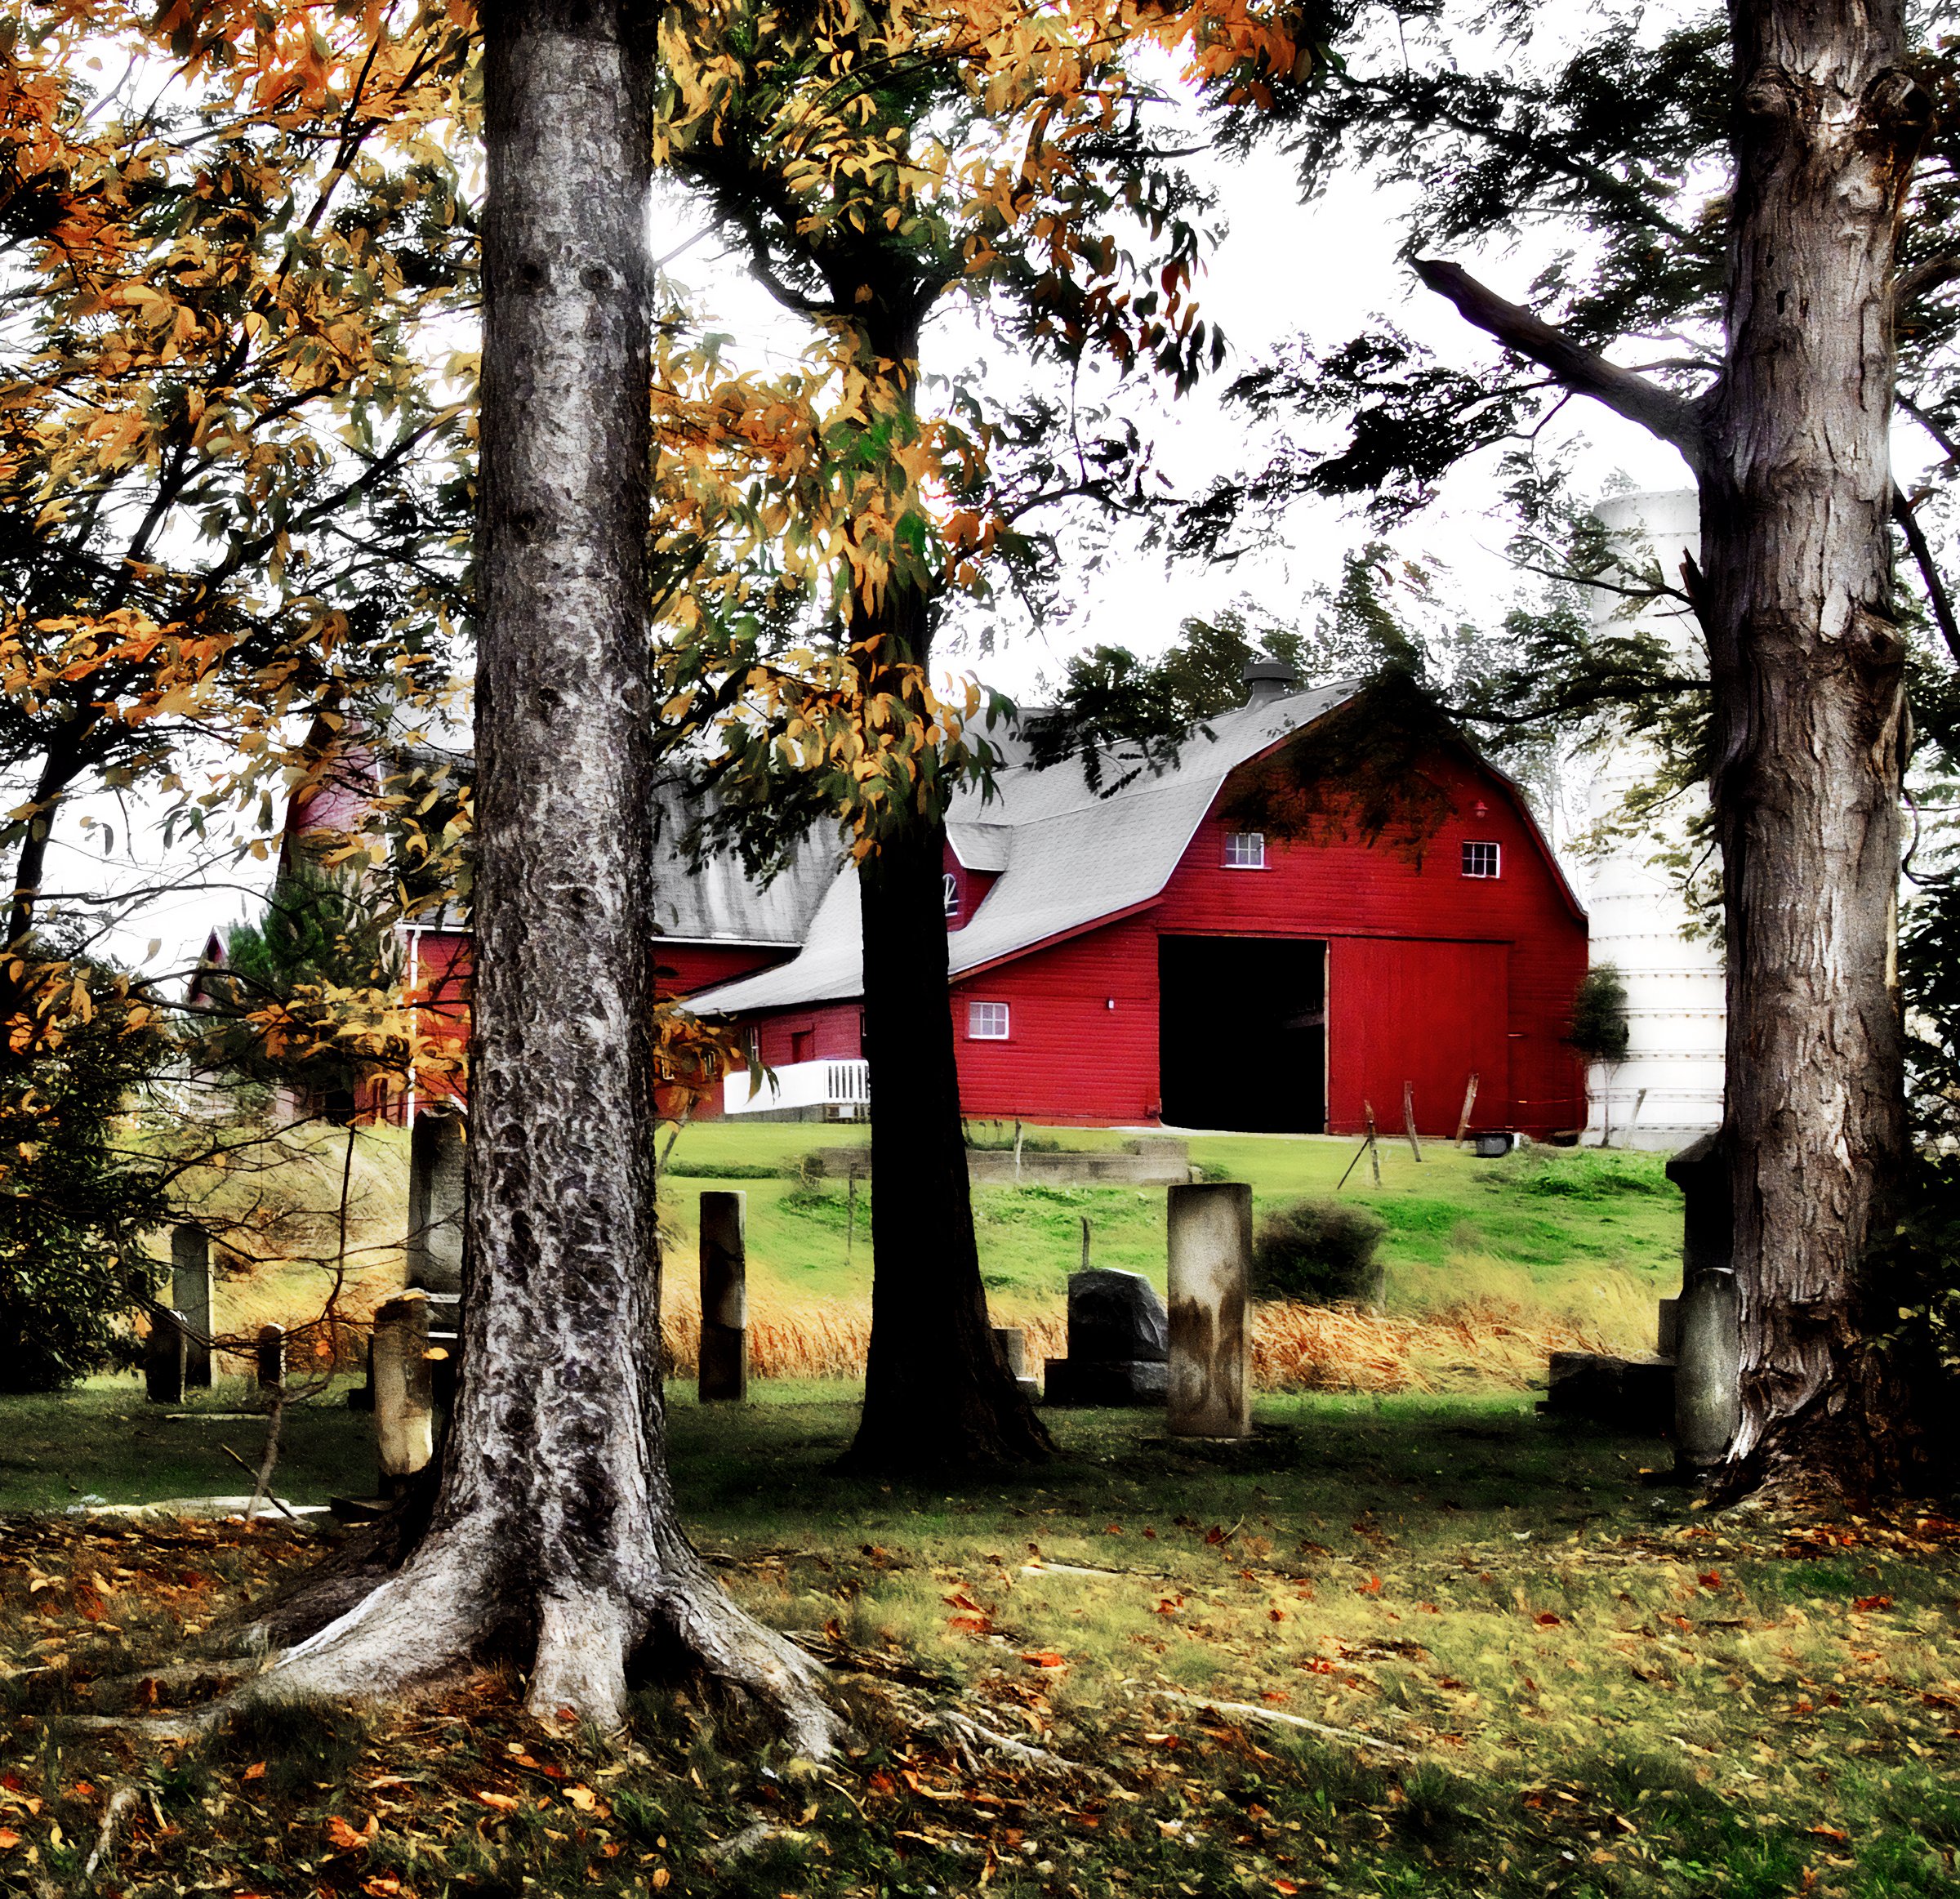 A Stones Throw to the Big Red Barn